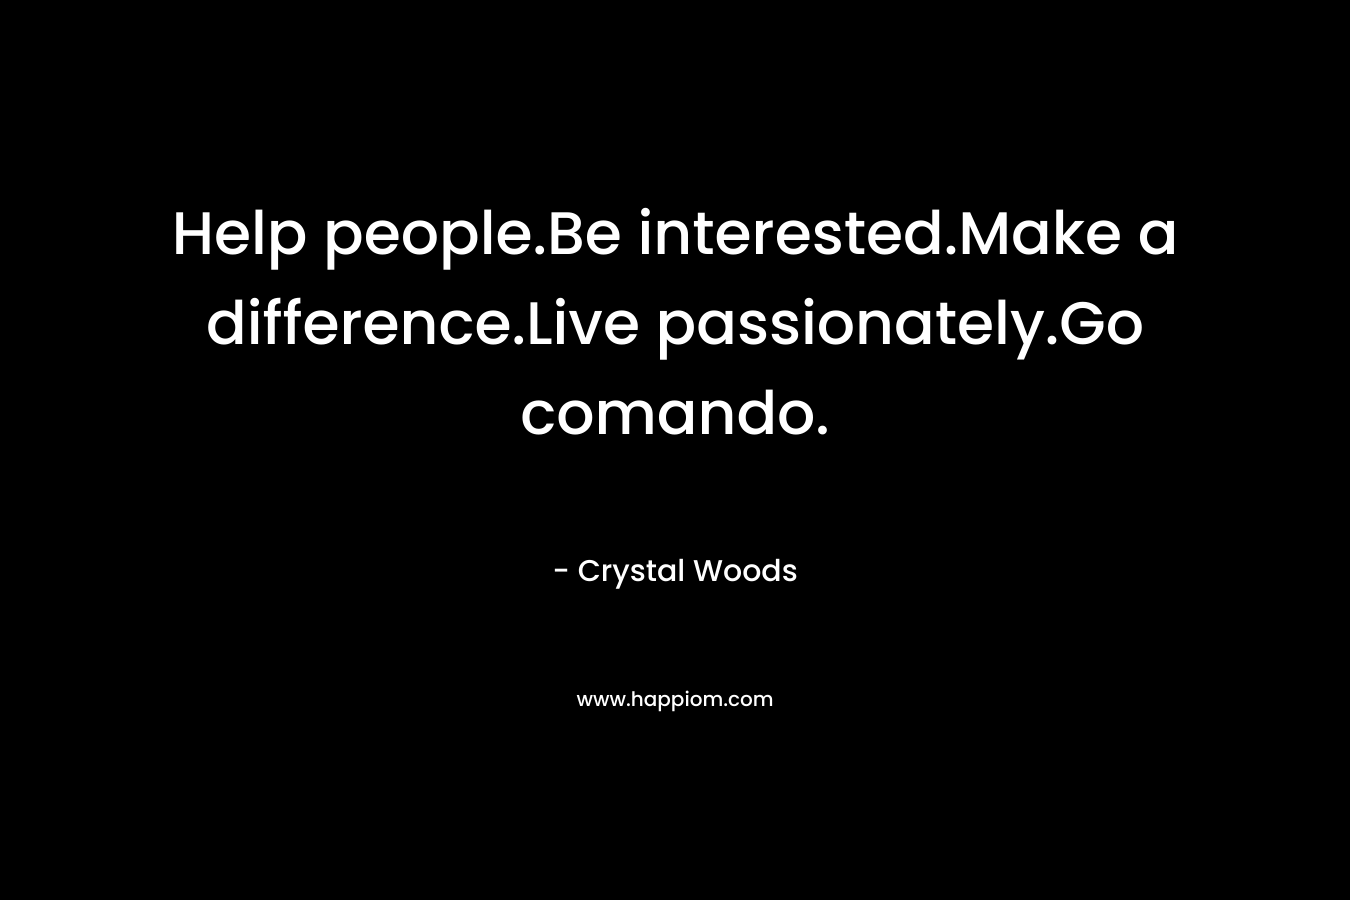 Help people.Be interested.Make a difference.Live passionately.Go comando.